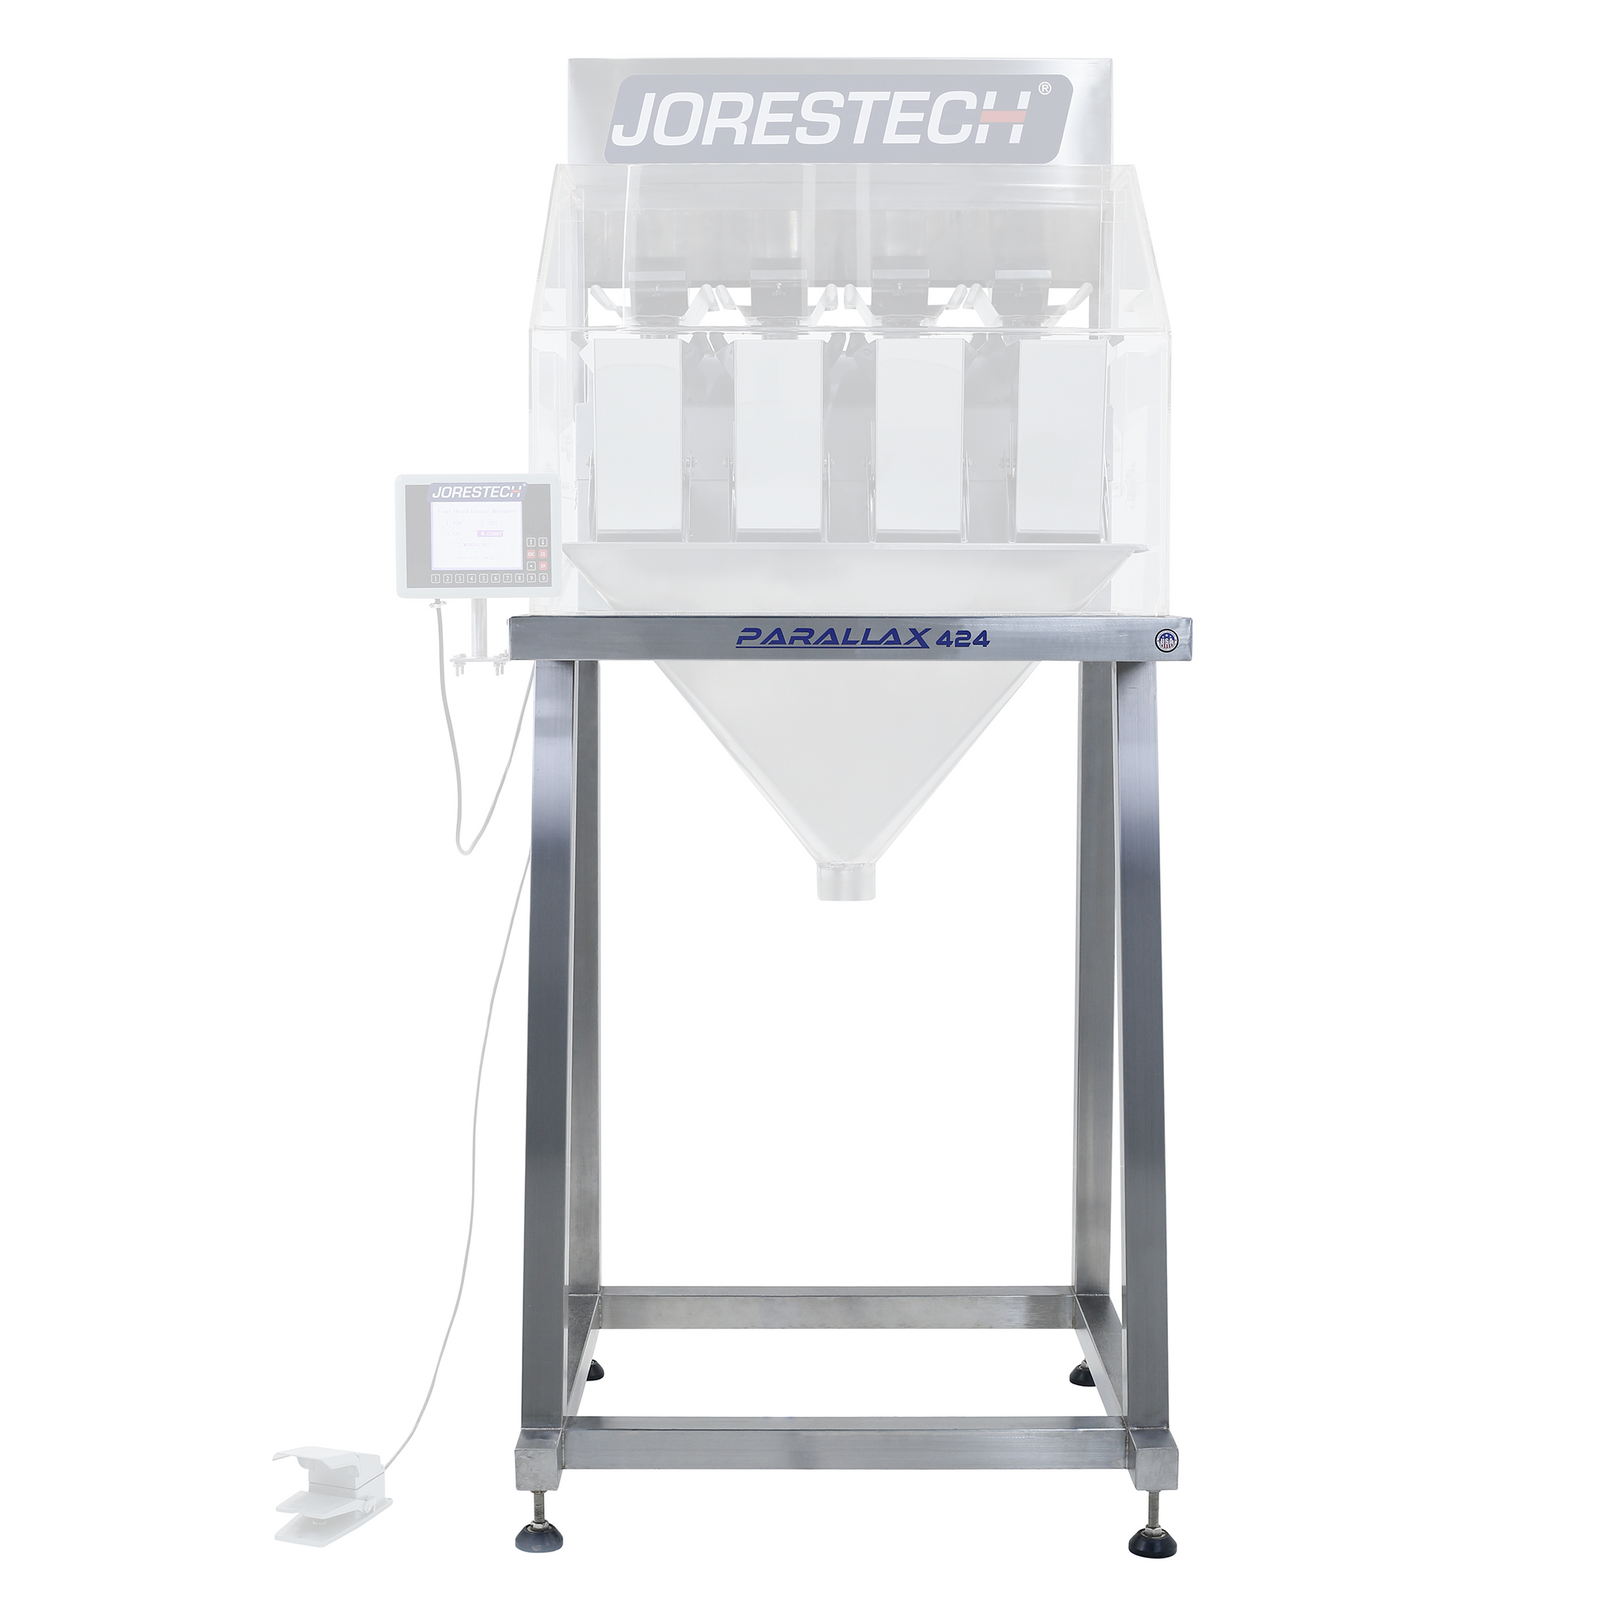 Heavy duty stainless steel stand for the JORES TECHNOLOGIES® 4 head linear weigher